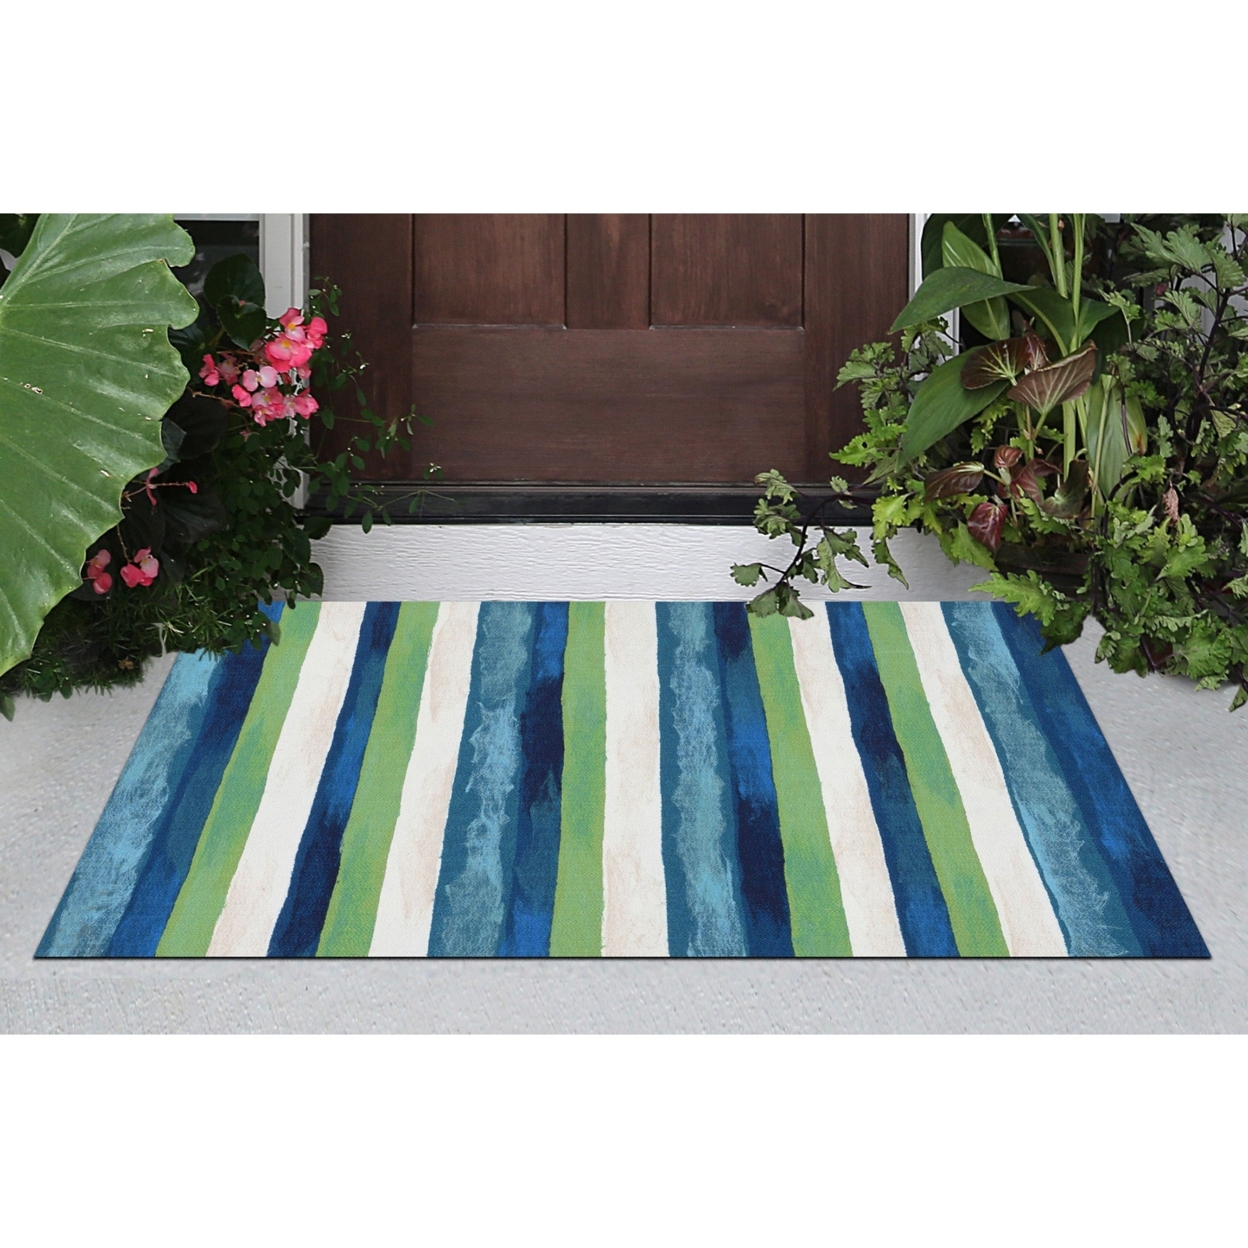 Liora Manne Visions II Painted Stripes Indoor Outdoor Area Rug Cool - 3'6 X 5'6